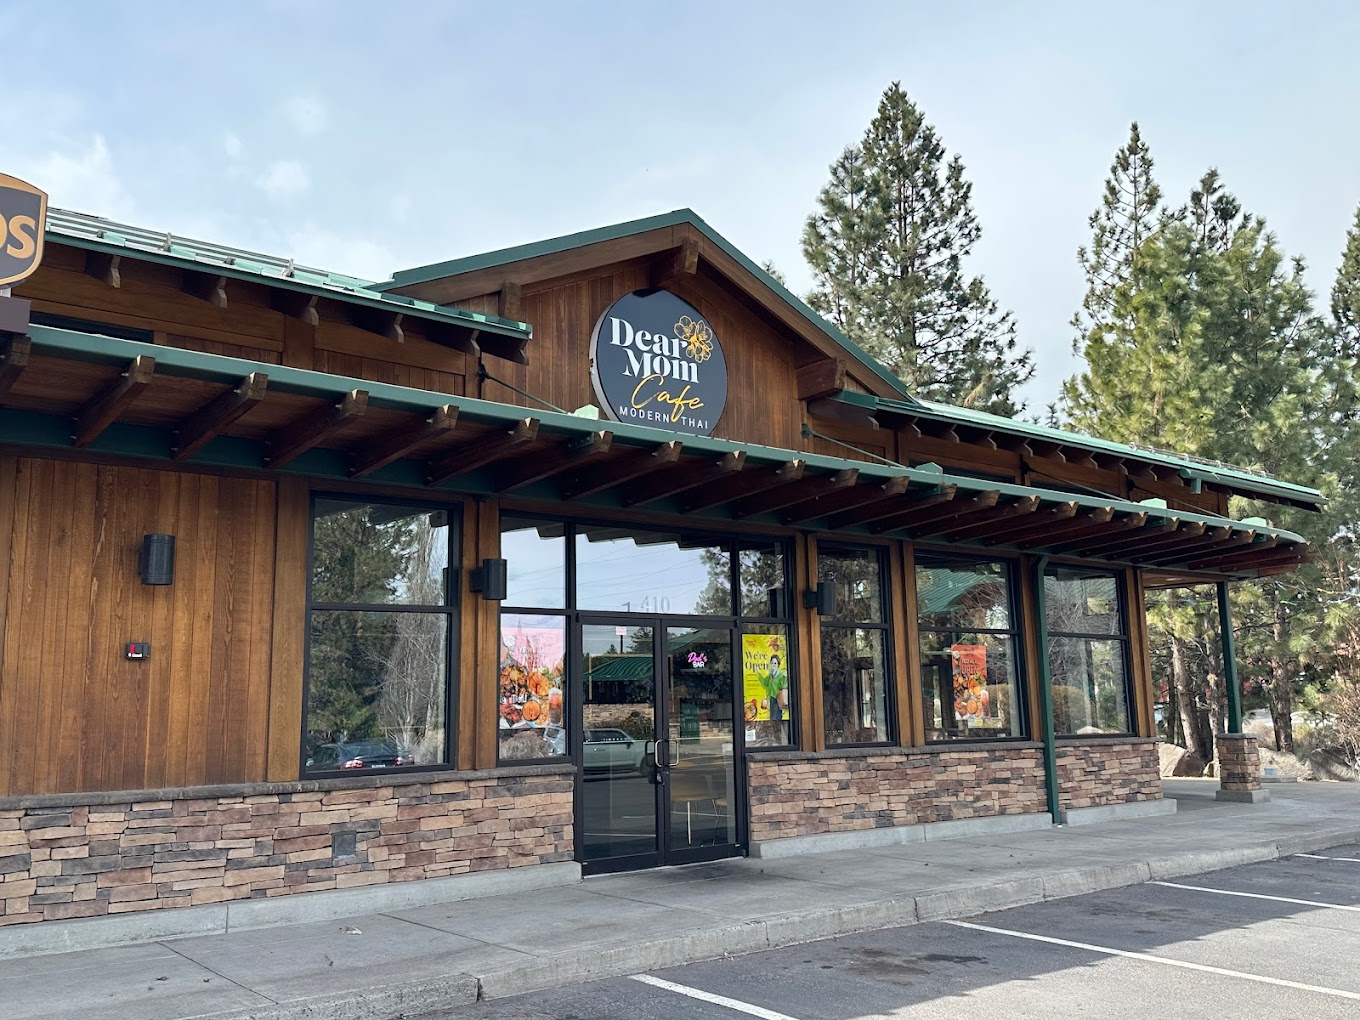 Treat Your Mom (and Your Friends) to this Fantastic New Thai Restaurant in Bend